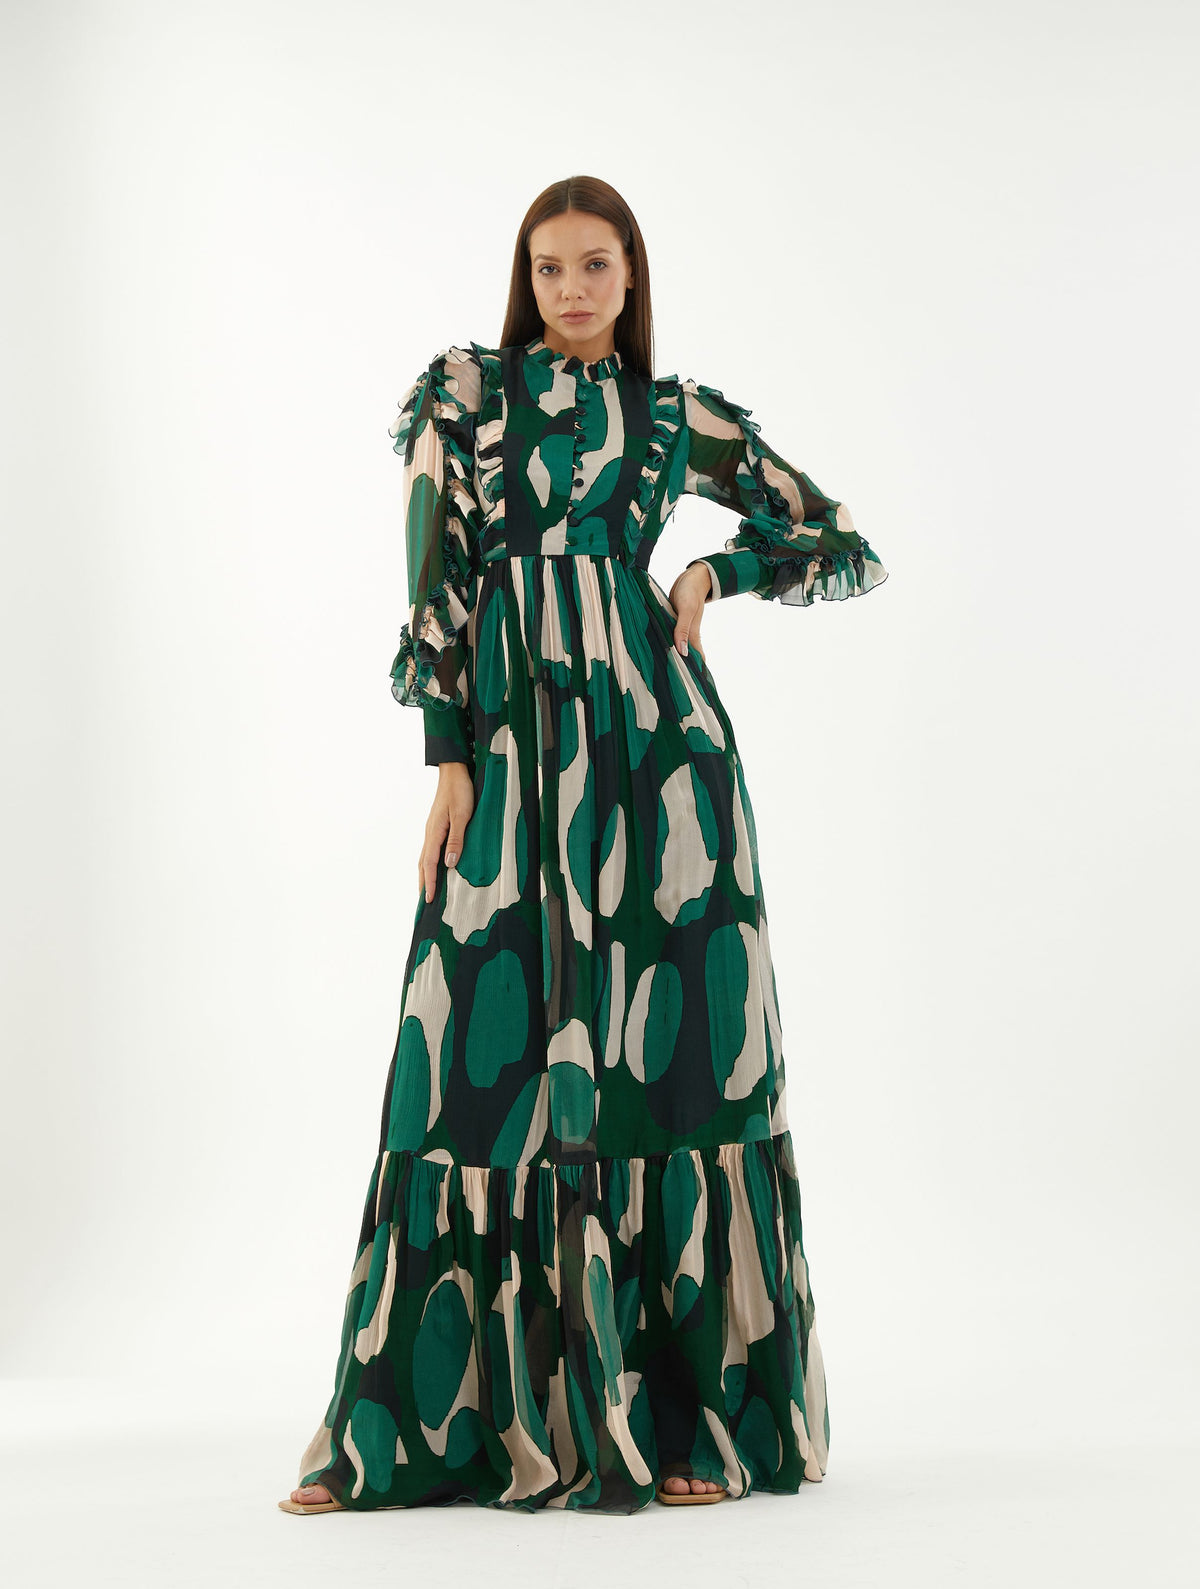 GREEN, BLACK AND OFF-WHITE ABSTRACT FRILL LONG DRESS